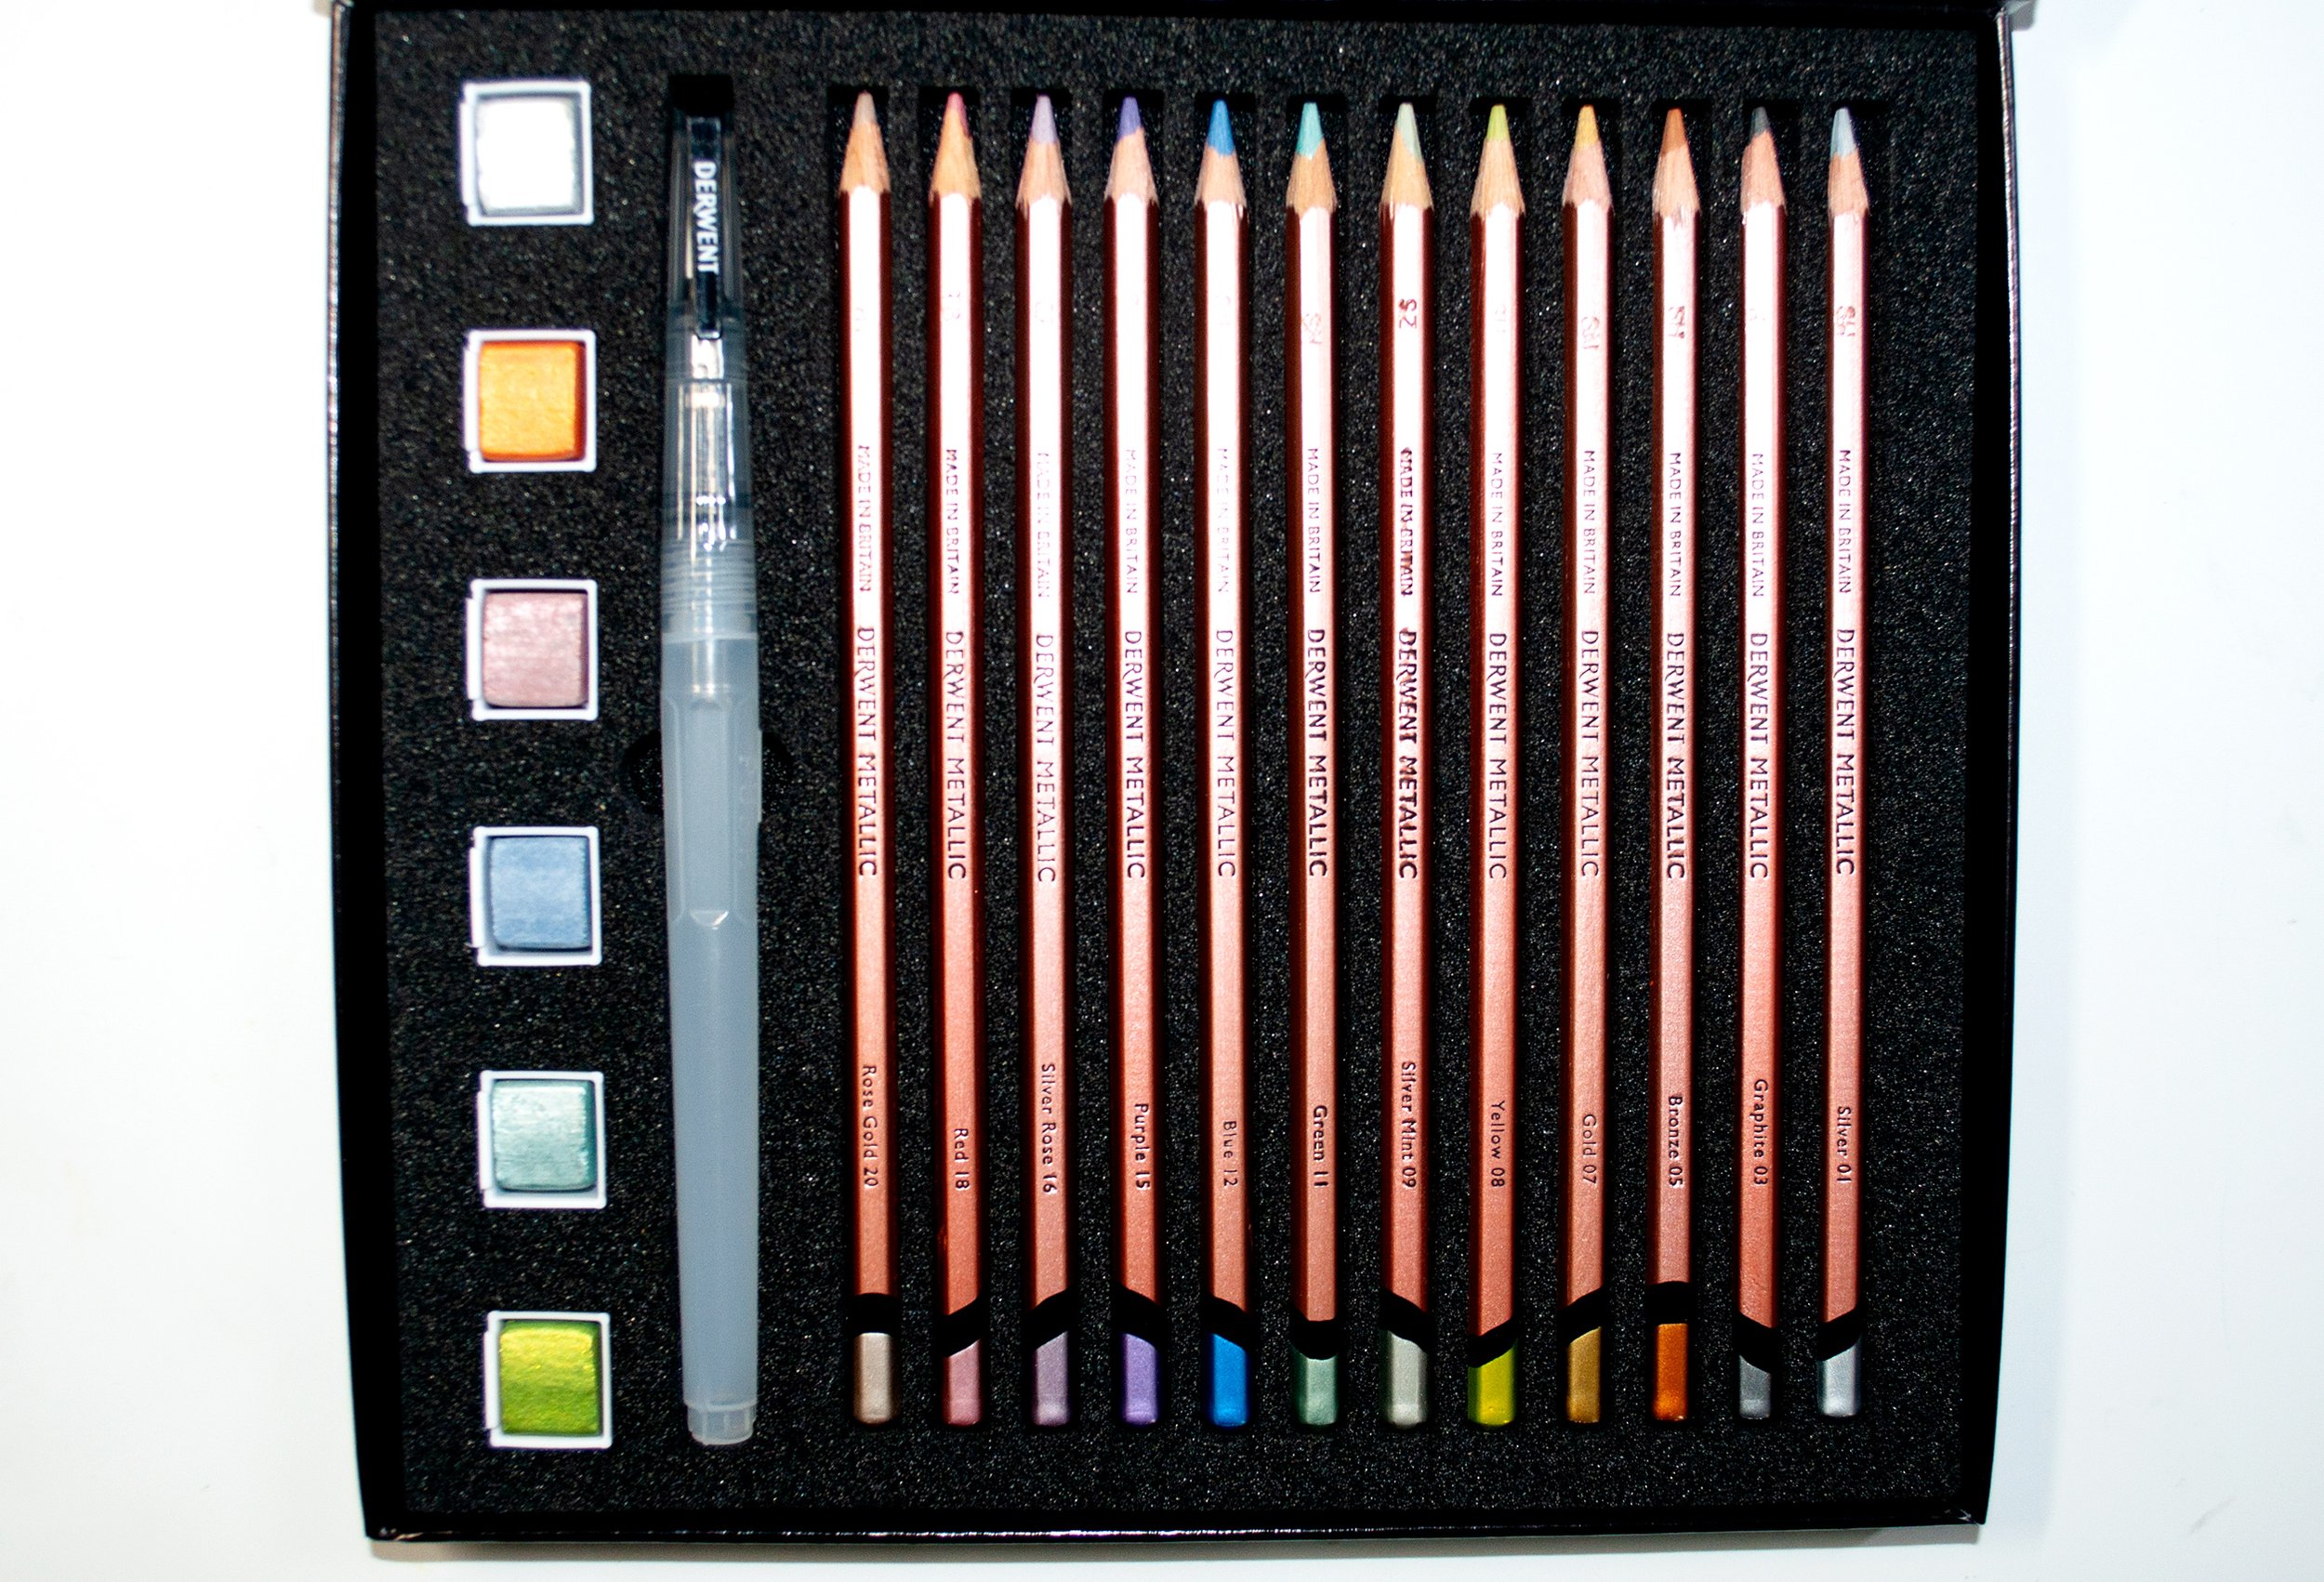 Derwent Inktense Pencils 72 Colors In Bulk, Firm Texture, Watersoluble,  Ideal for Watercolor, Drawing, Coloring